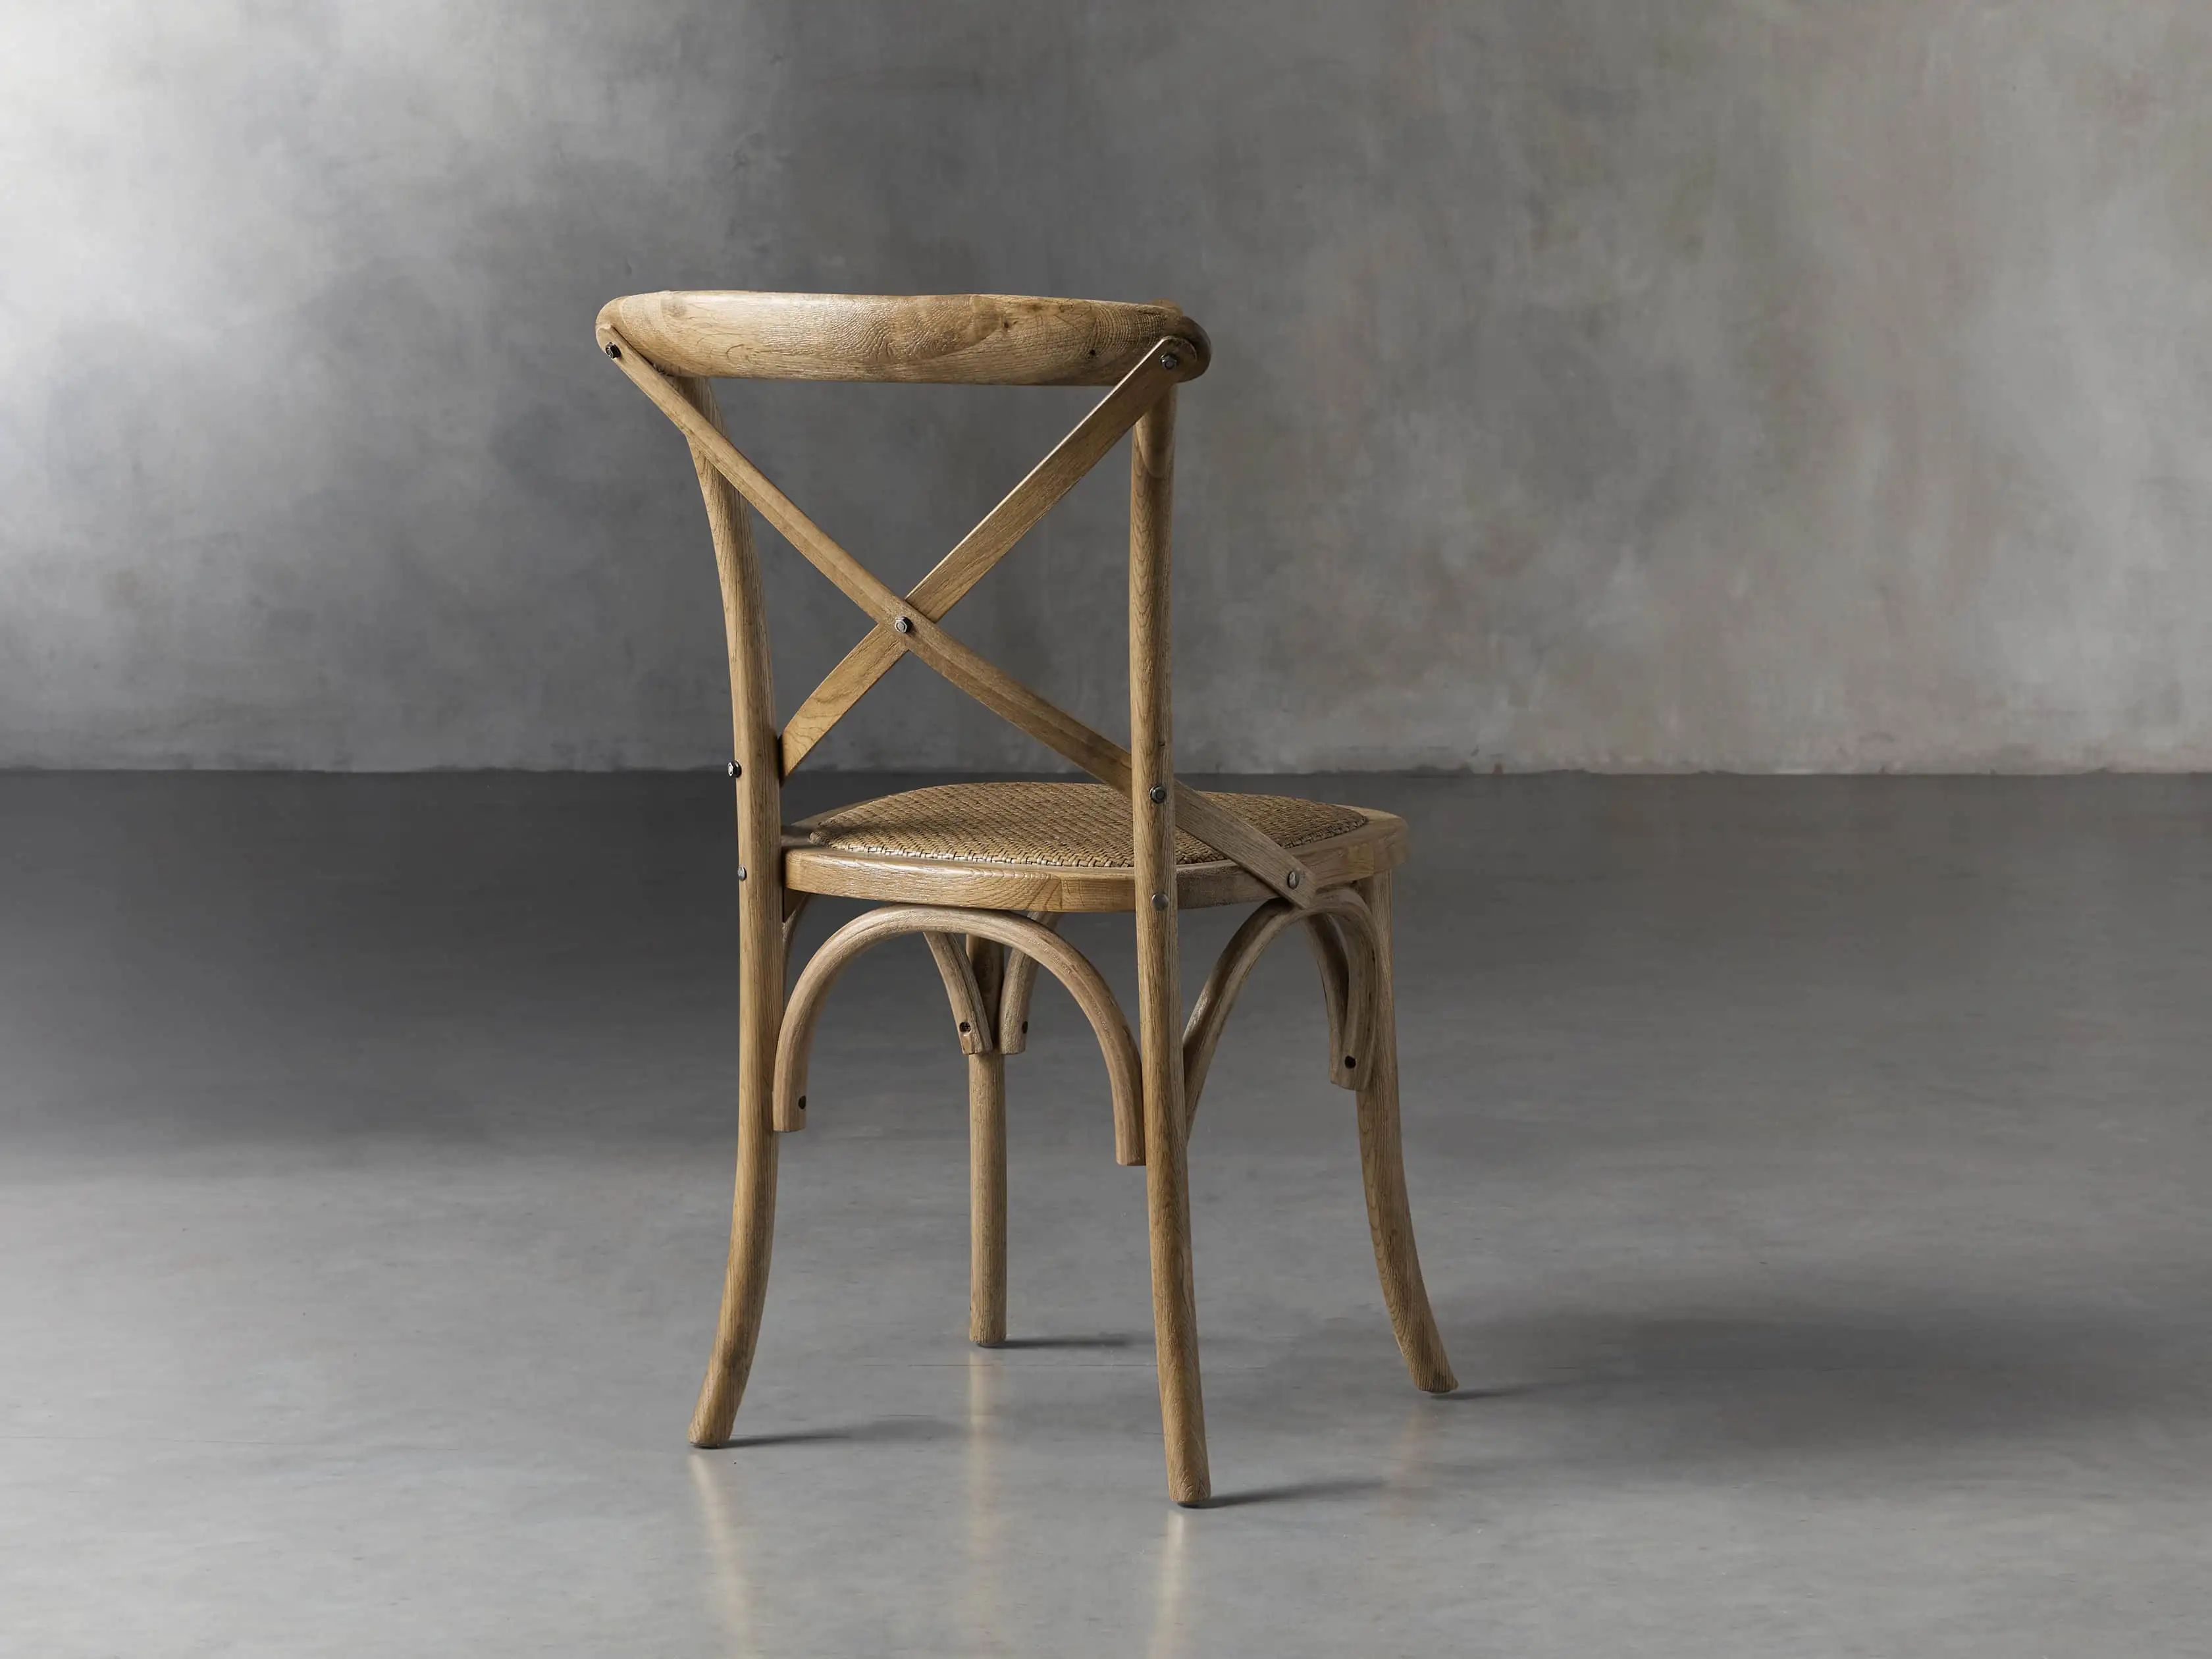 Cadence Dining Chair with Rattan Seat | Arhaus